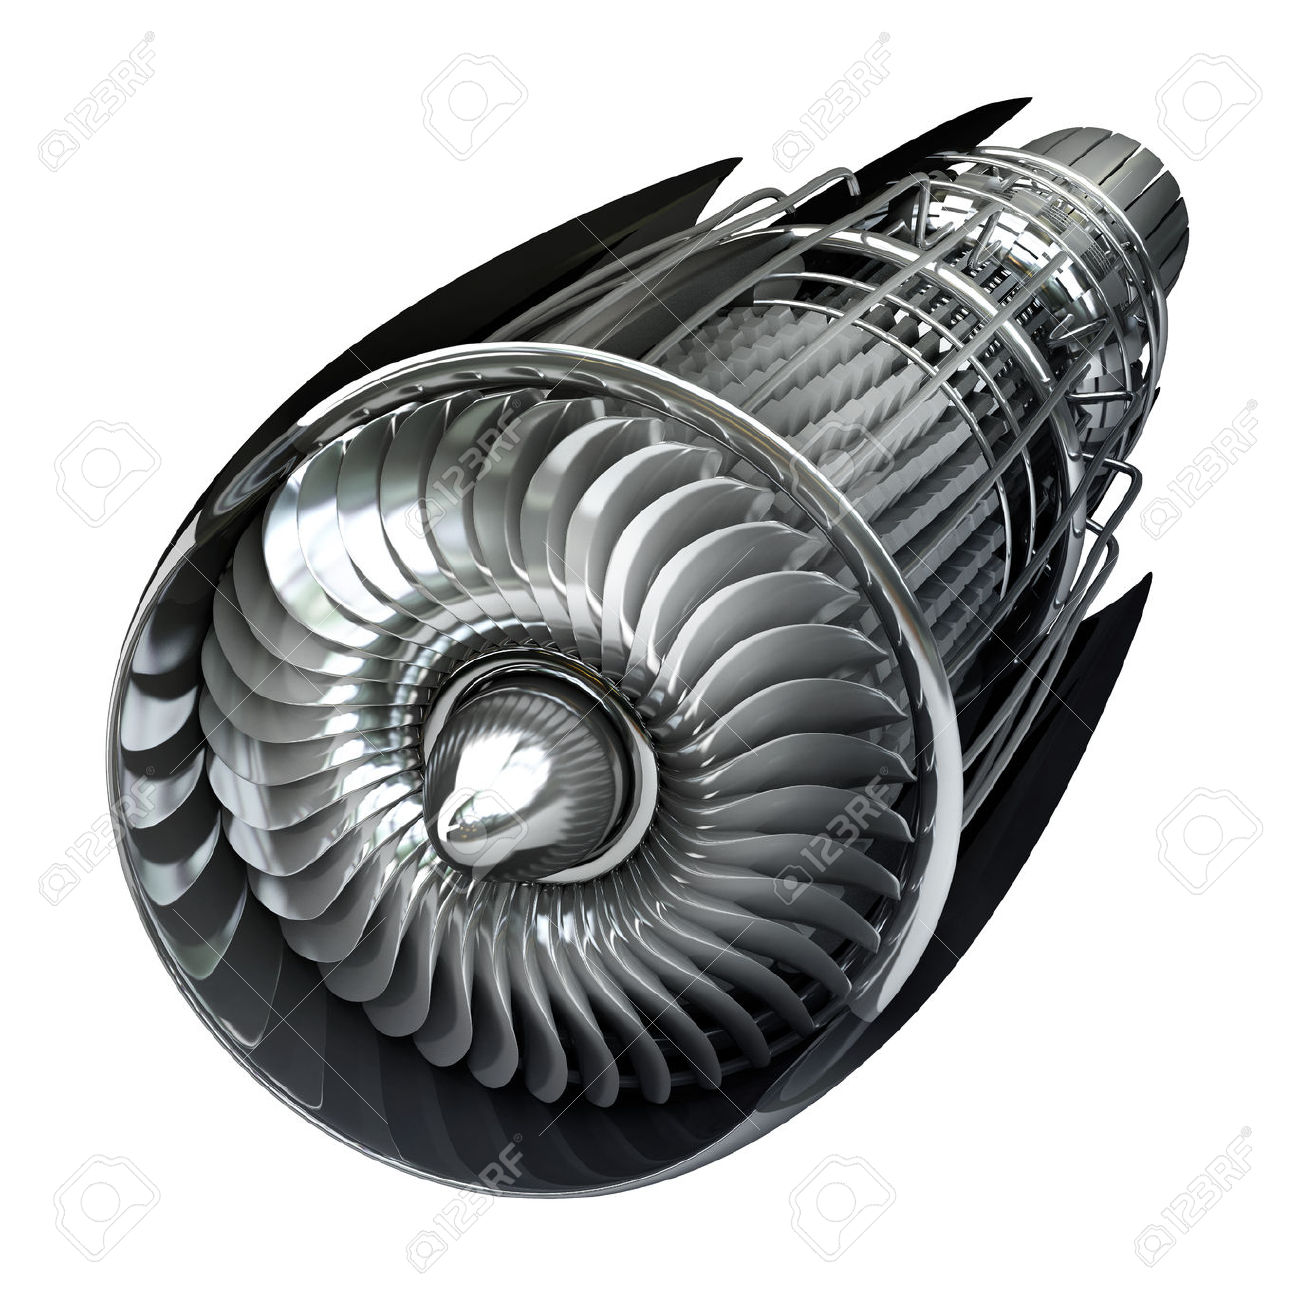 Jet Engine Inside Isolated On White Background High Resolution.